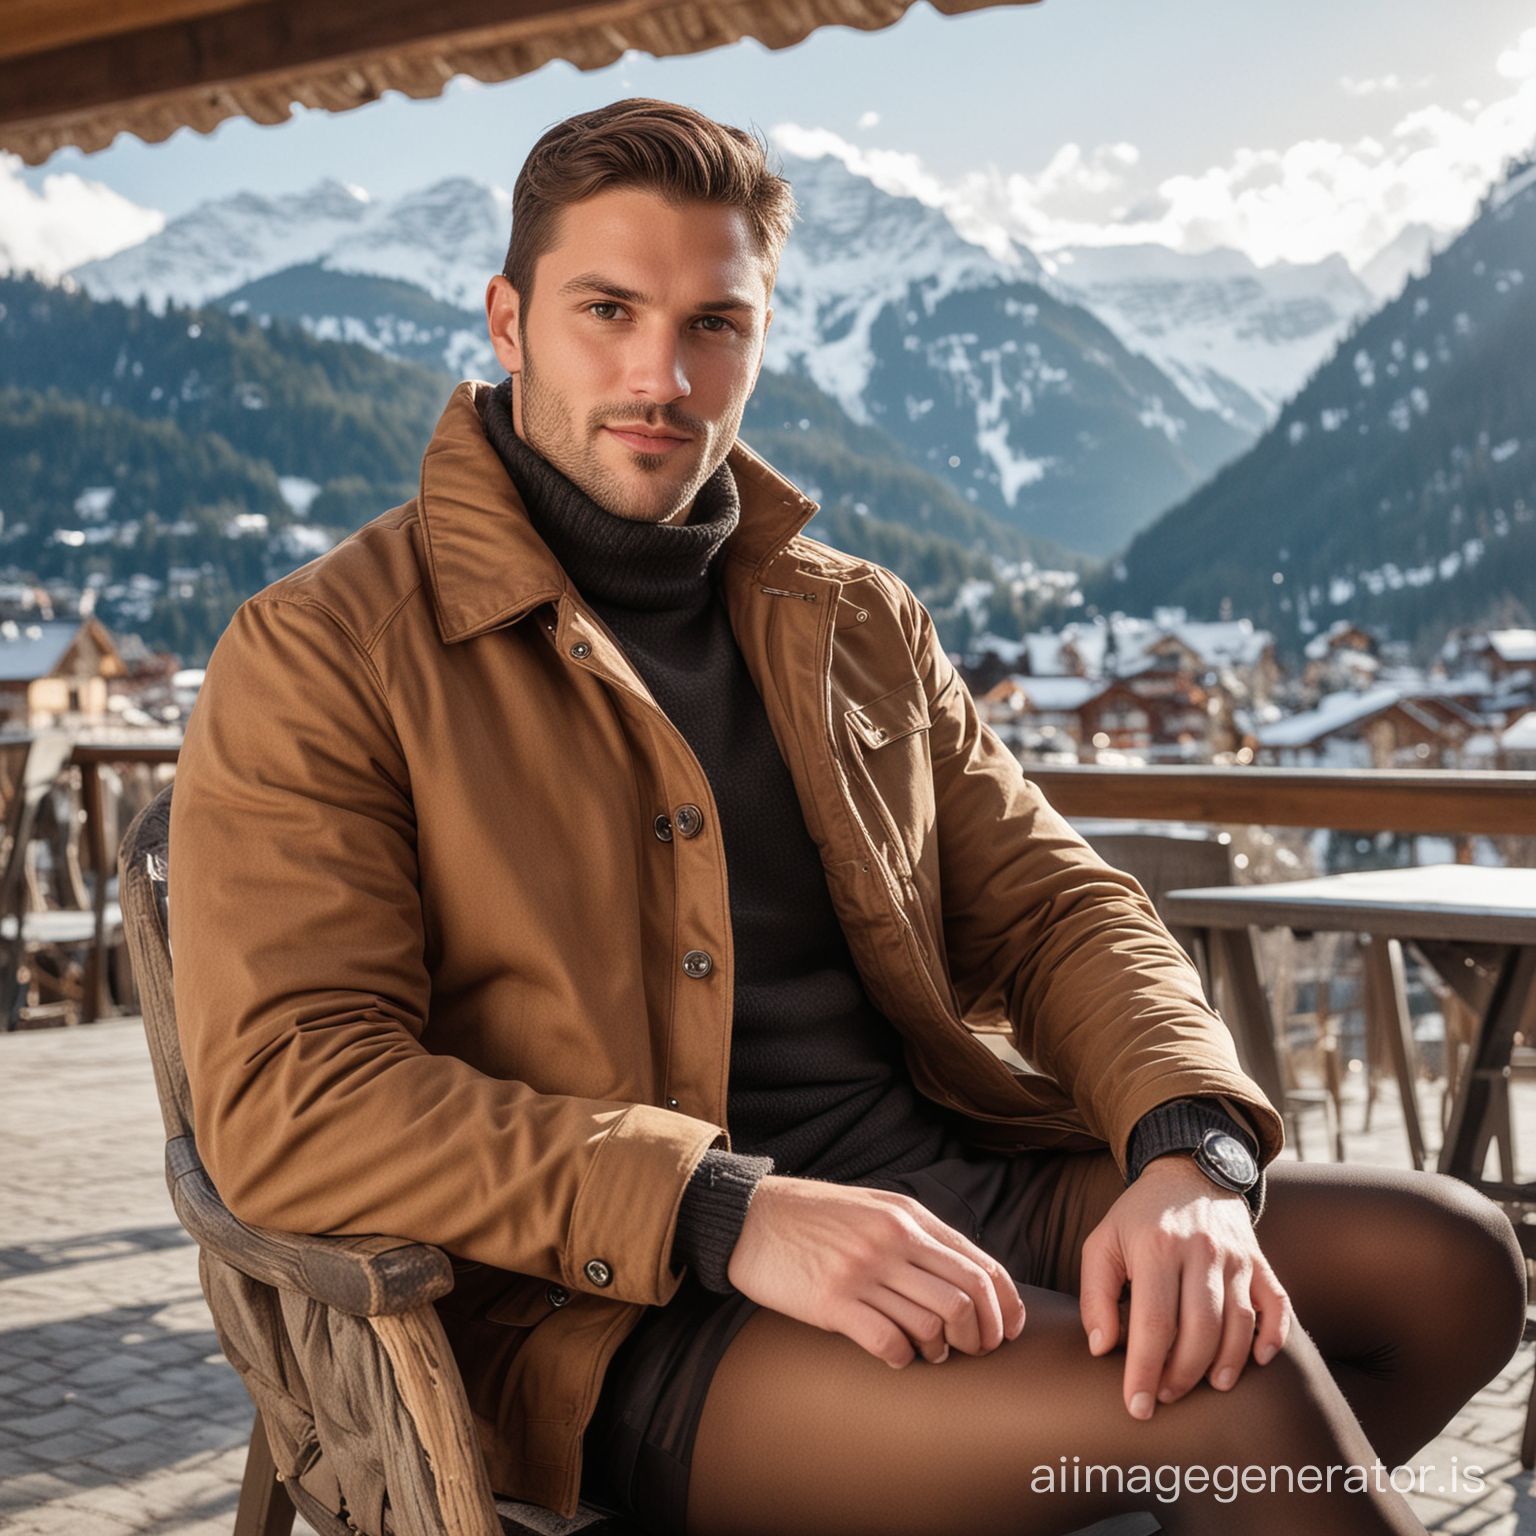 sturdy rugged 28-year old business man with brown winter jacket, wearing sheer tights, sitting on a chair at a table outside in Gstaad